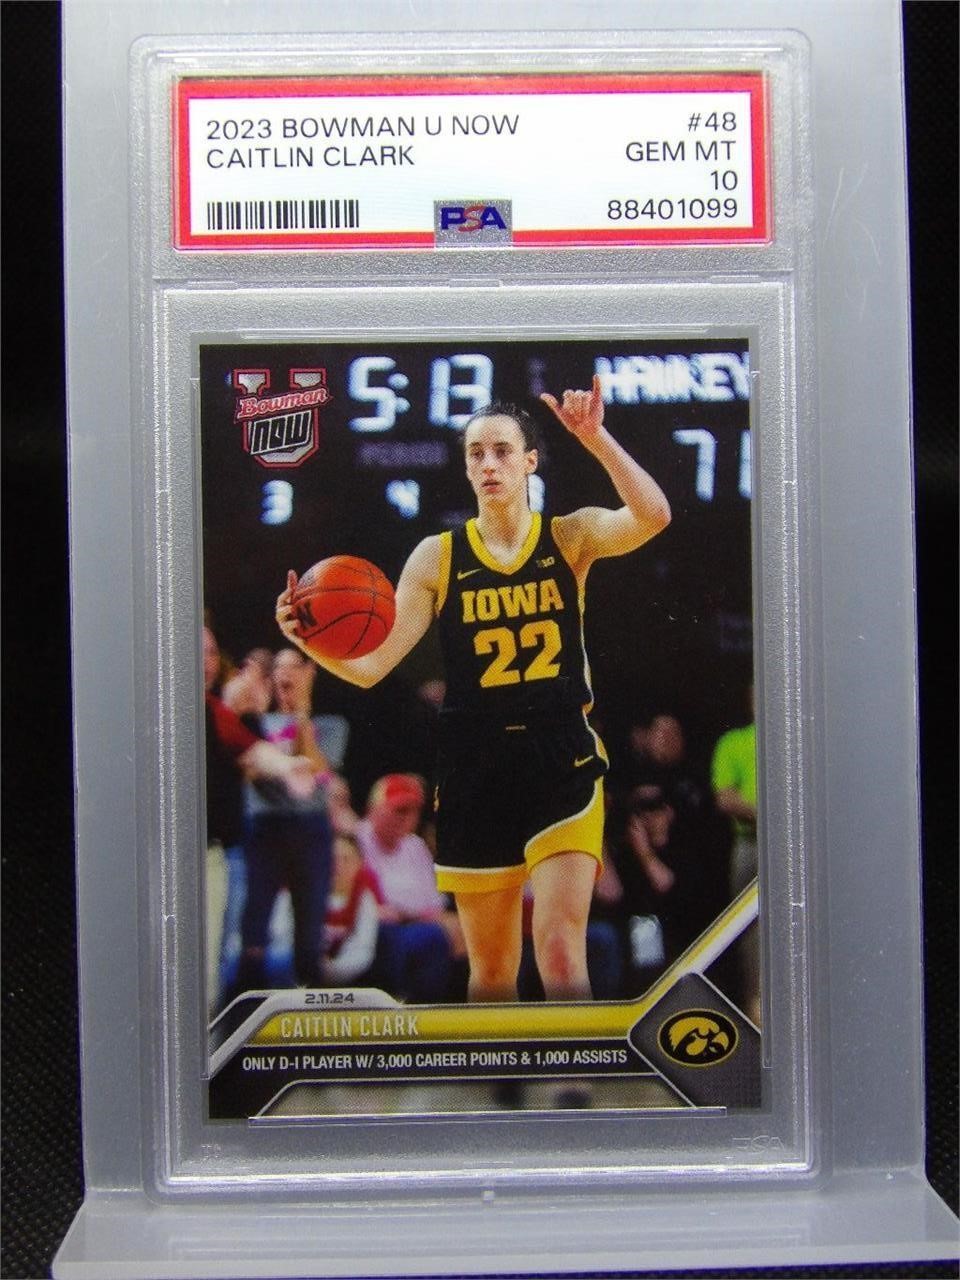 Modern (mostly) Sports Card Auction - April 28 7:00 PM Cent